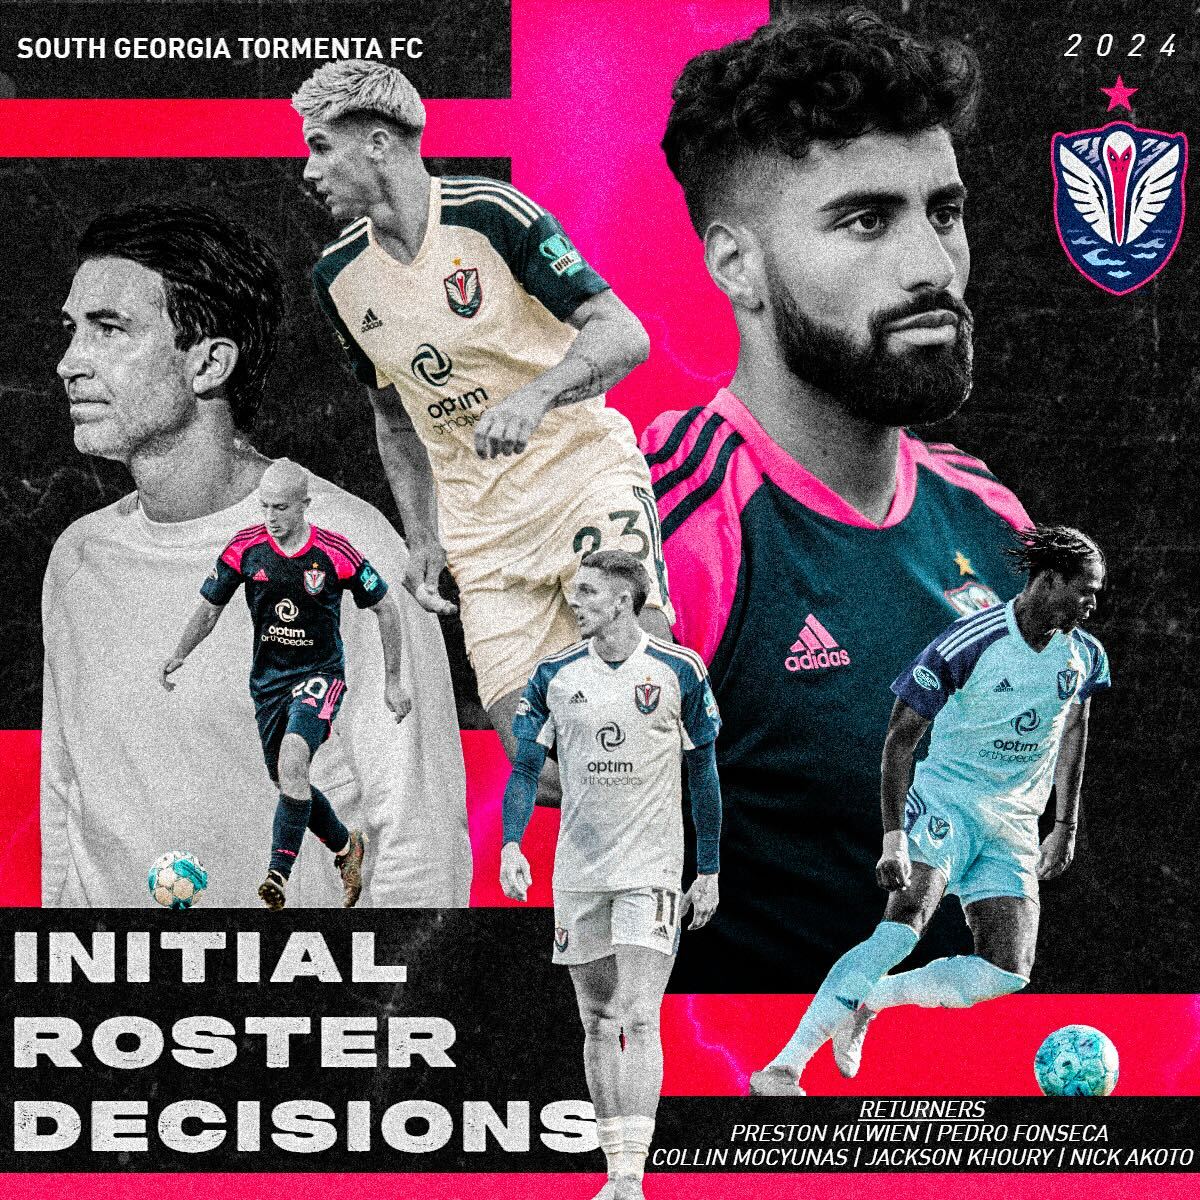 Tormenta FC Announces Initial 2024 Roster Decisions featured image